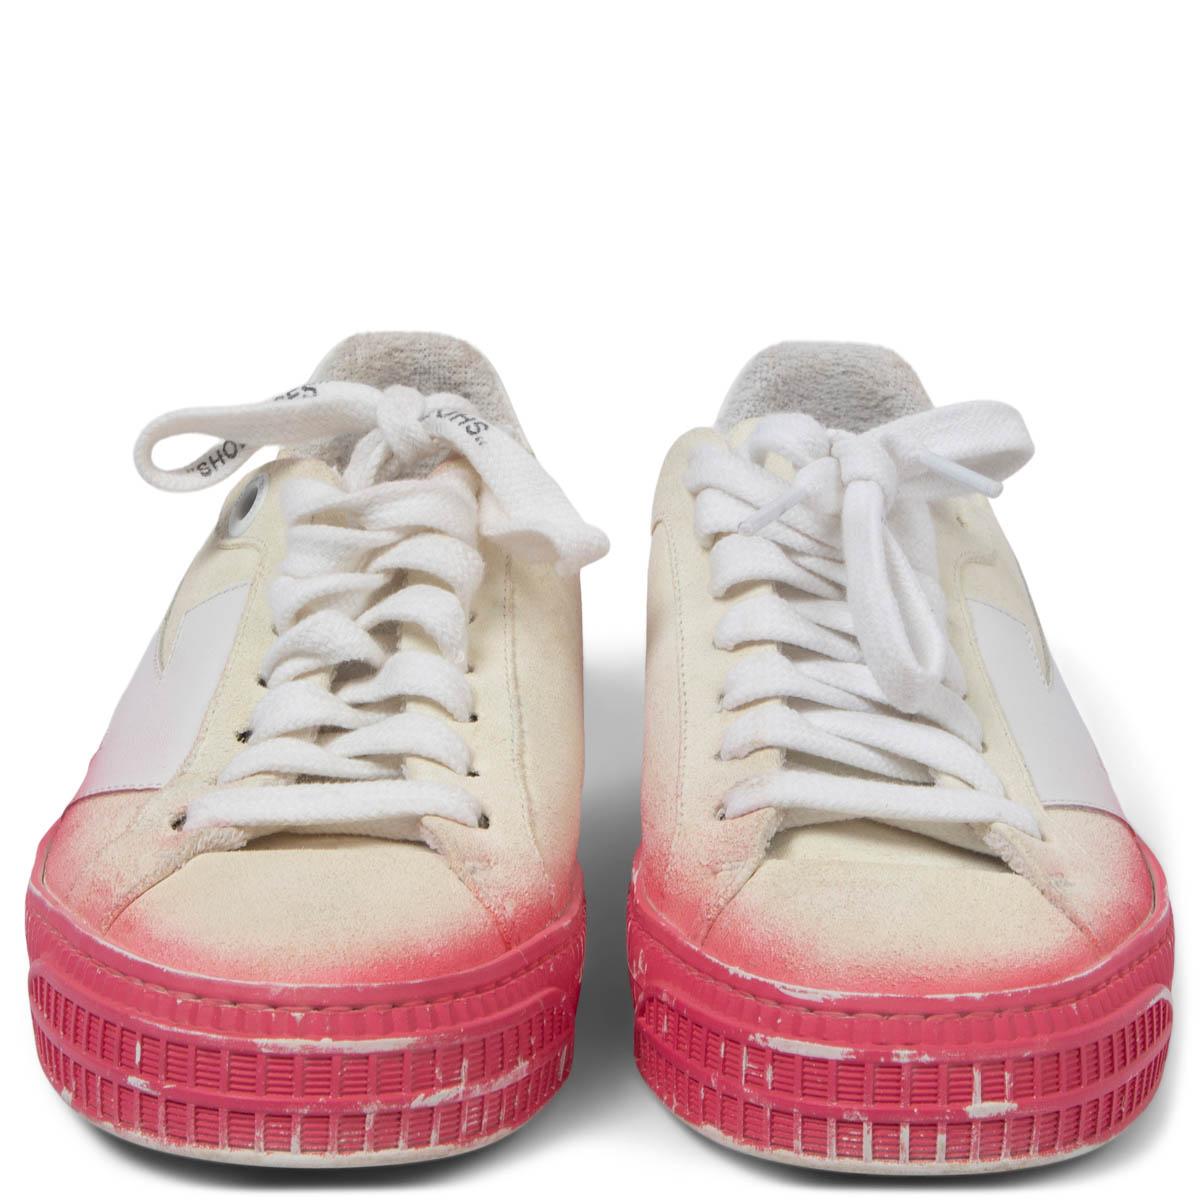 100% authentic OFF-WHITE Arrow low top sneakers in ivory distressed suede with white leather arrow and pink spray paint on the rubber sole. Have been worn and are in excellent condition. 

Measurements
Imprinted Size	37 (run big)
Shoe Size	38
Inside